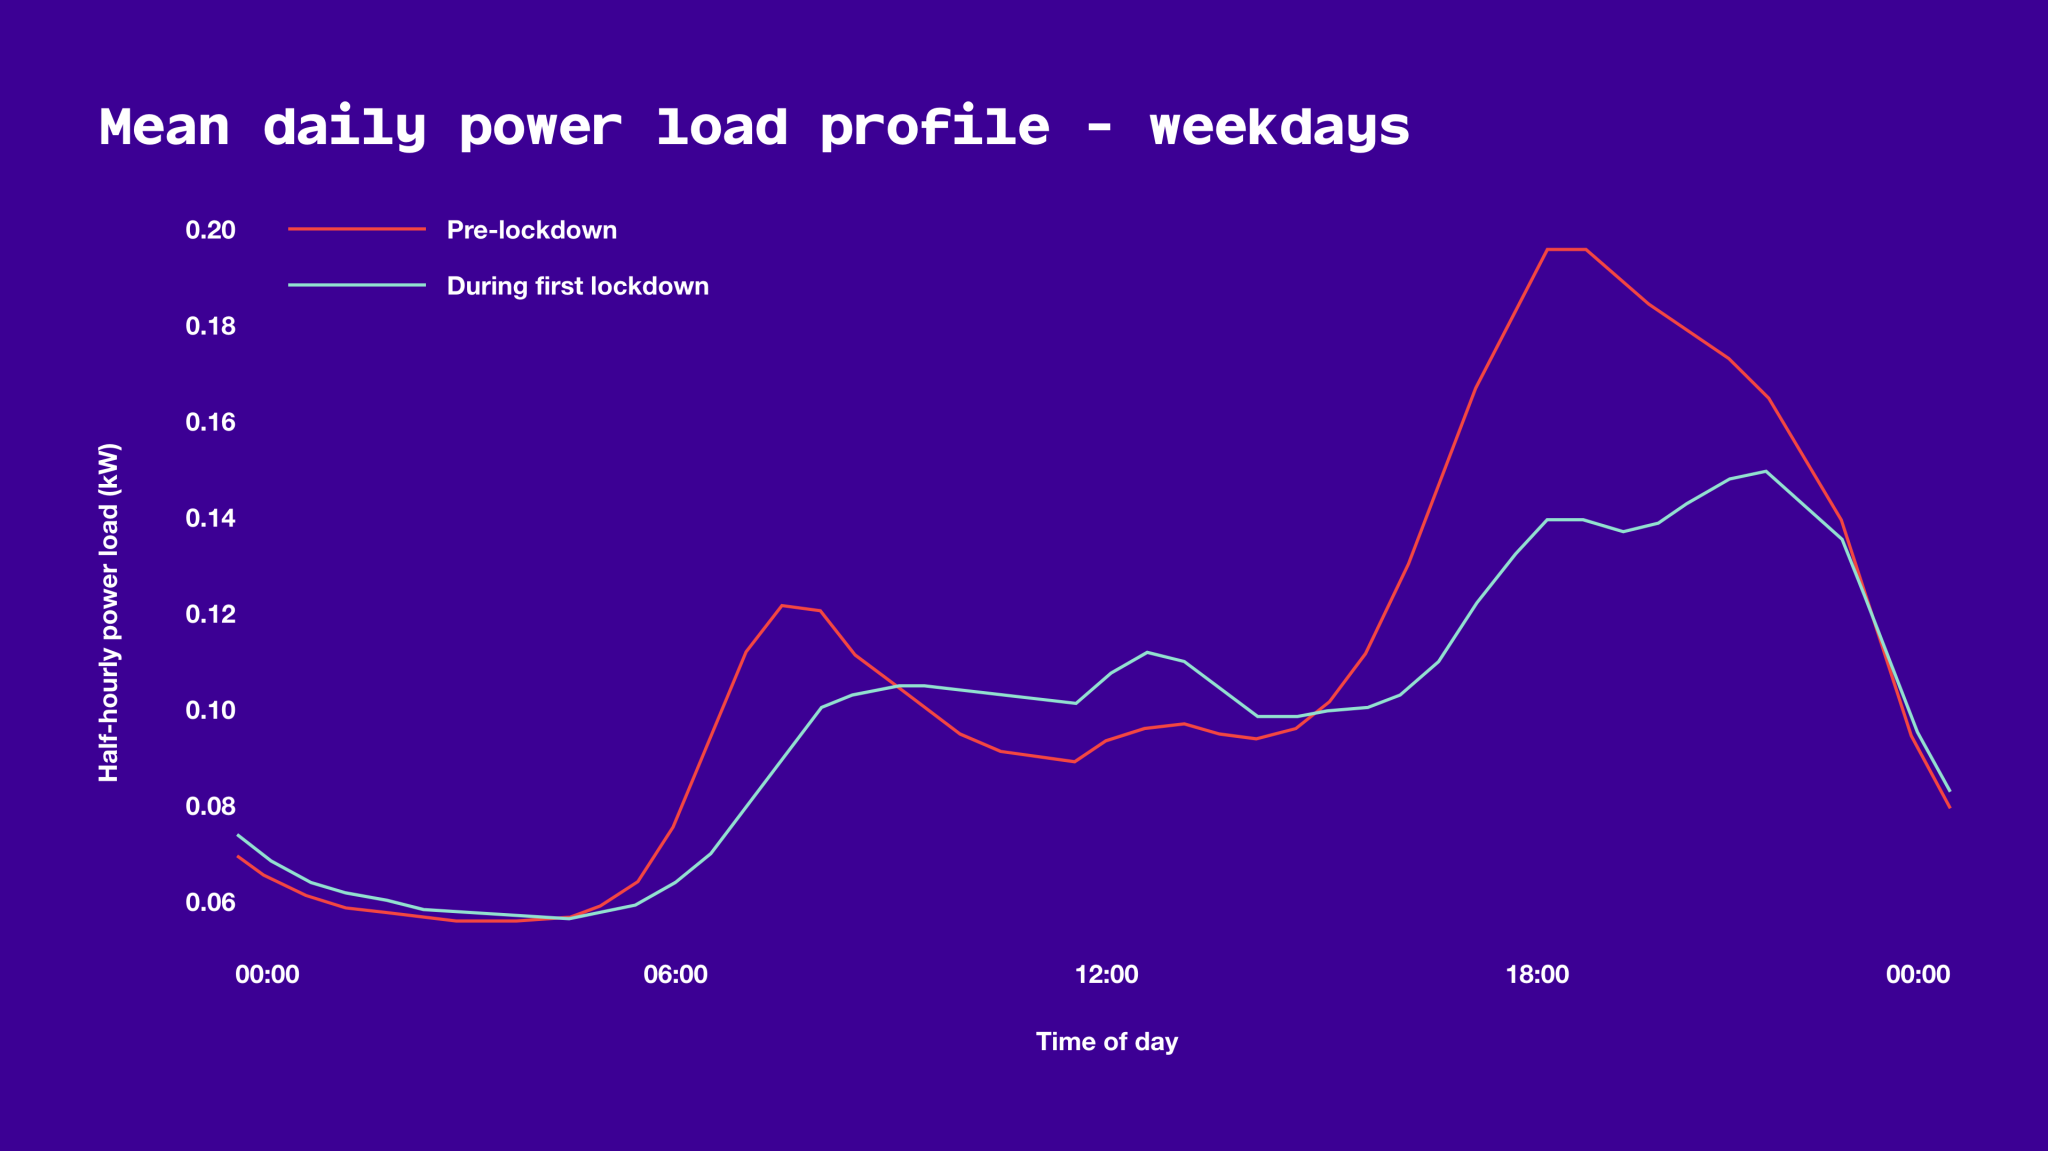 Graph showing mean daily power load profile pre and during the first lockdown (weekdays only). Pre-lockdown line shows a high surge in the morning and and a higher one in the evening. During lockdown, demand is slightly higher during the middle of the day.